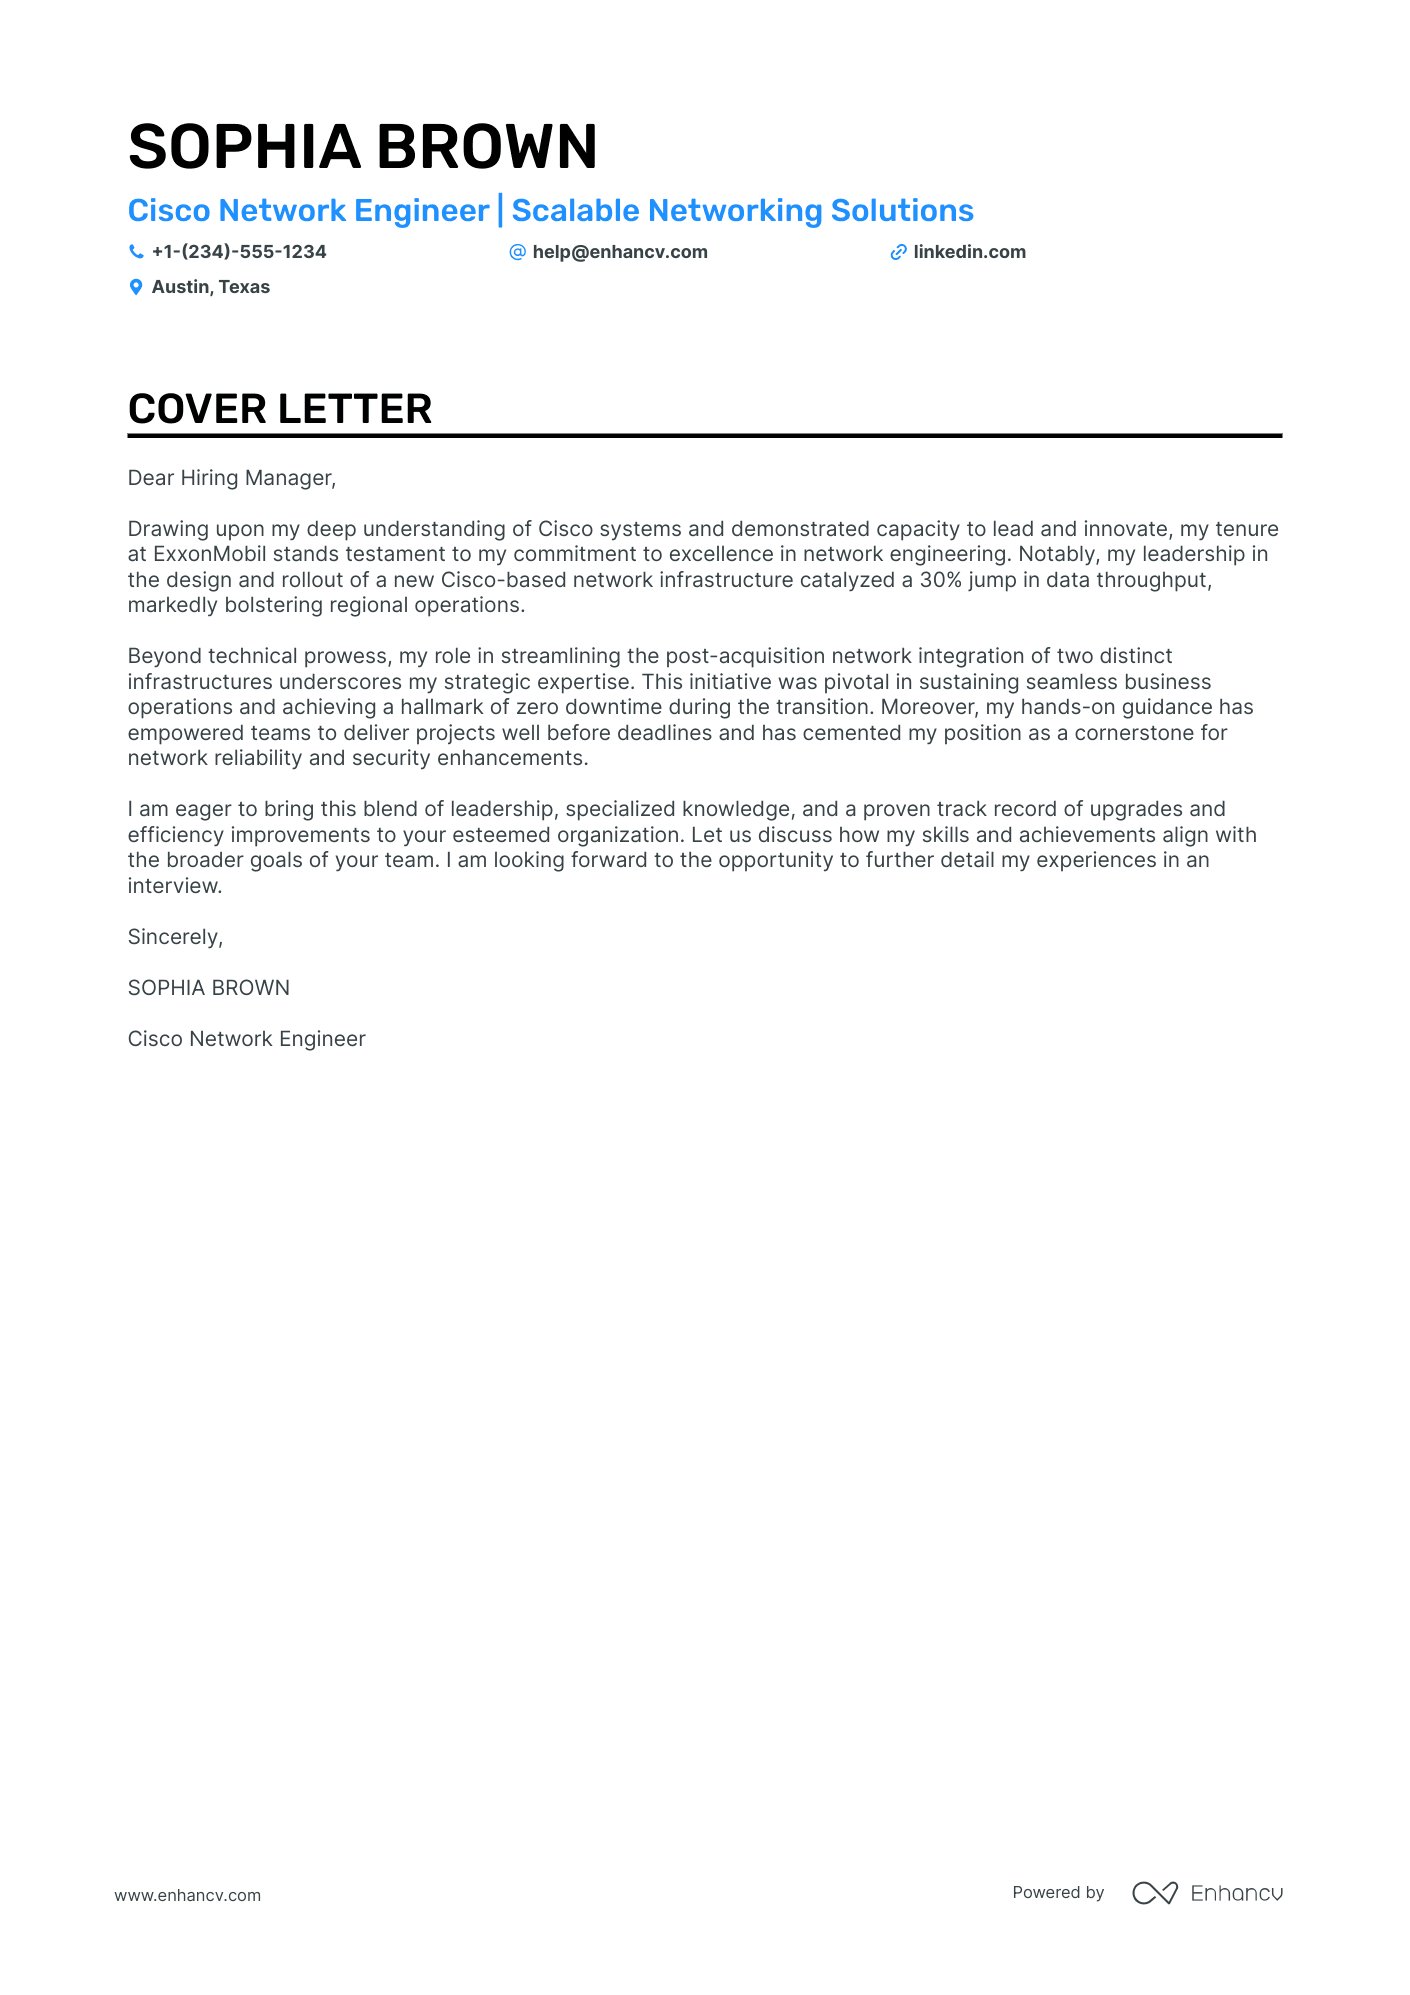 Cisco Network Engineer cover letter